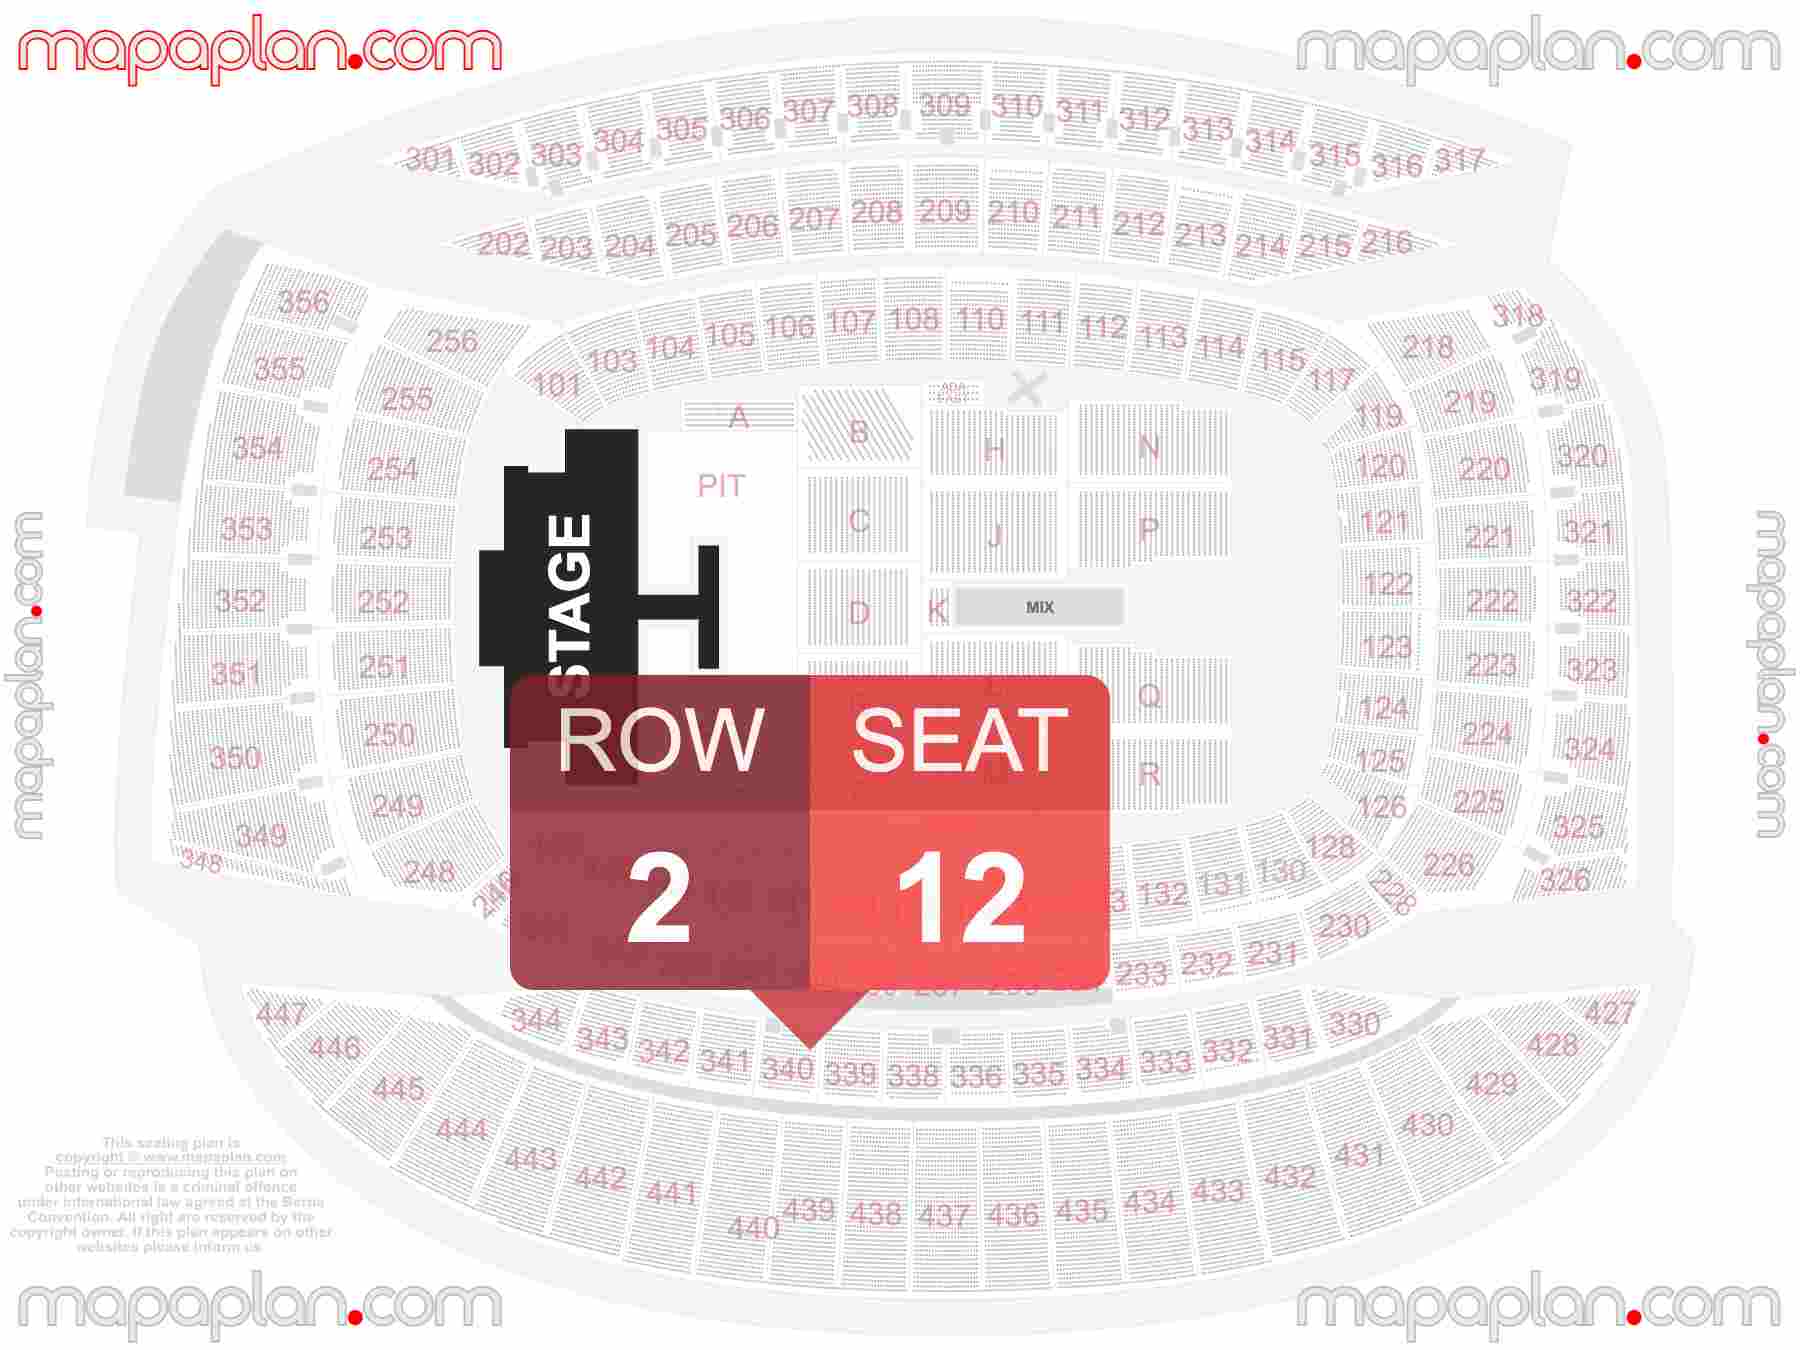 Chicago Soldier Field seating chart Concert with floor general admission PIT standing detailed seating chart - 3d virtual seat numbers and row layout